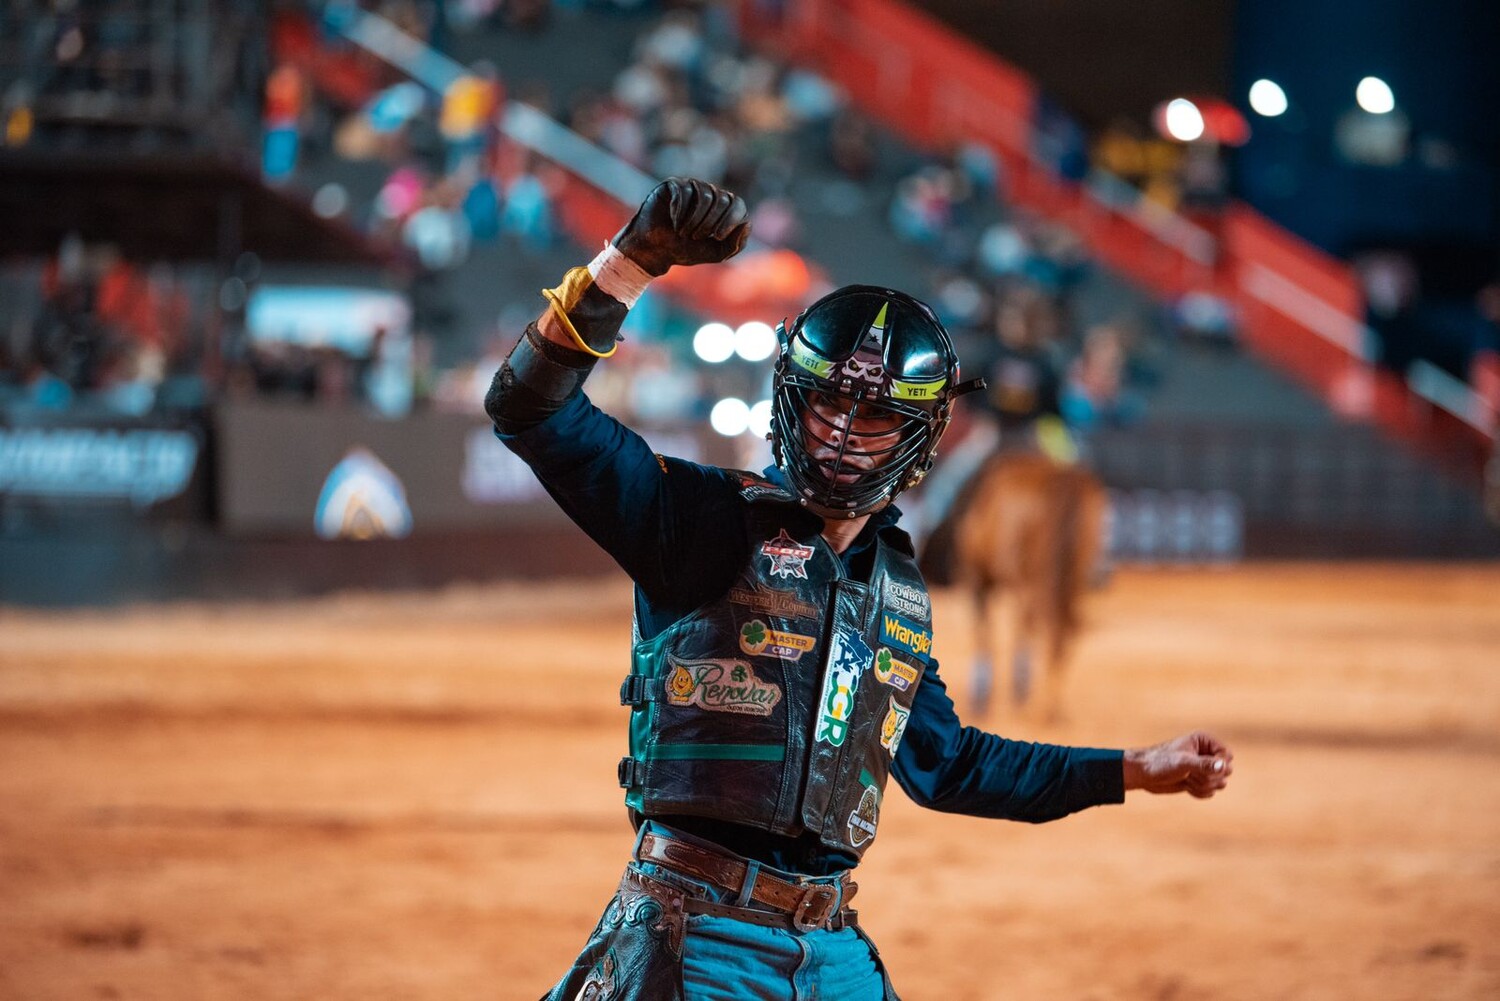 Jean Fernandez shines at Baritos Stadium and secures a place in the final in Las Vegas